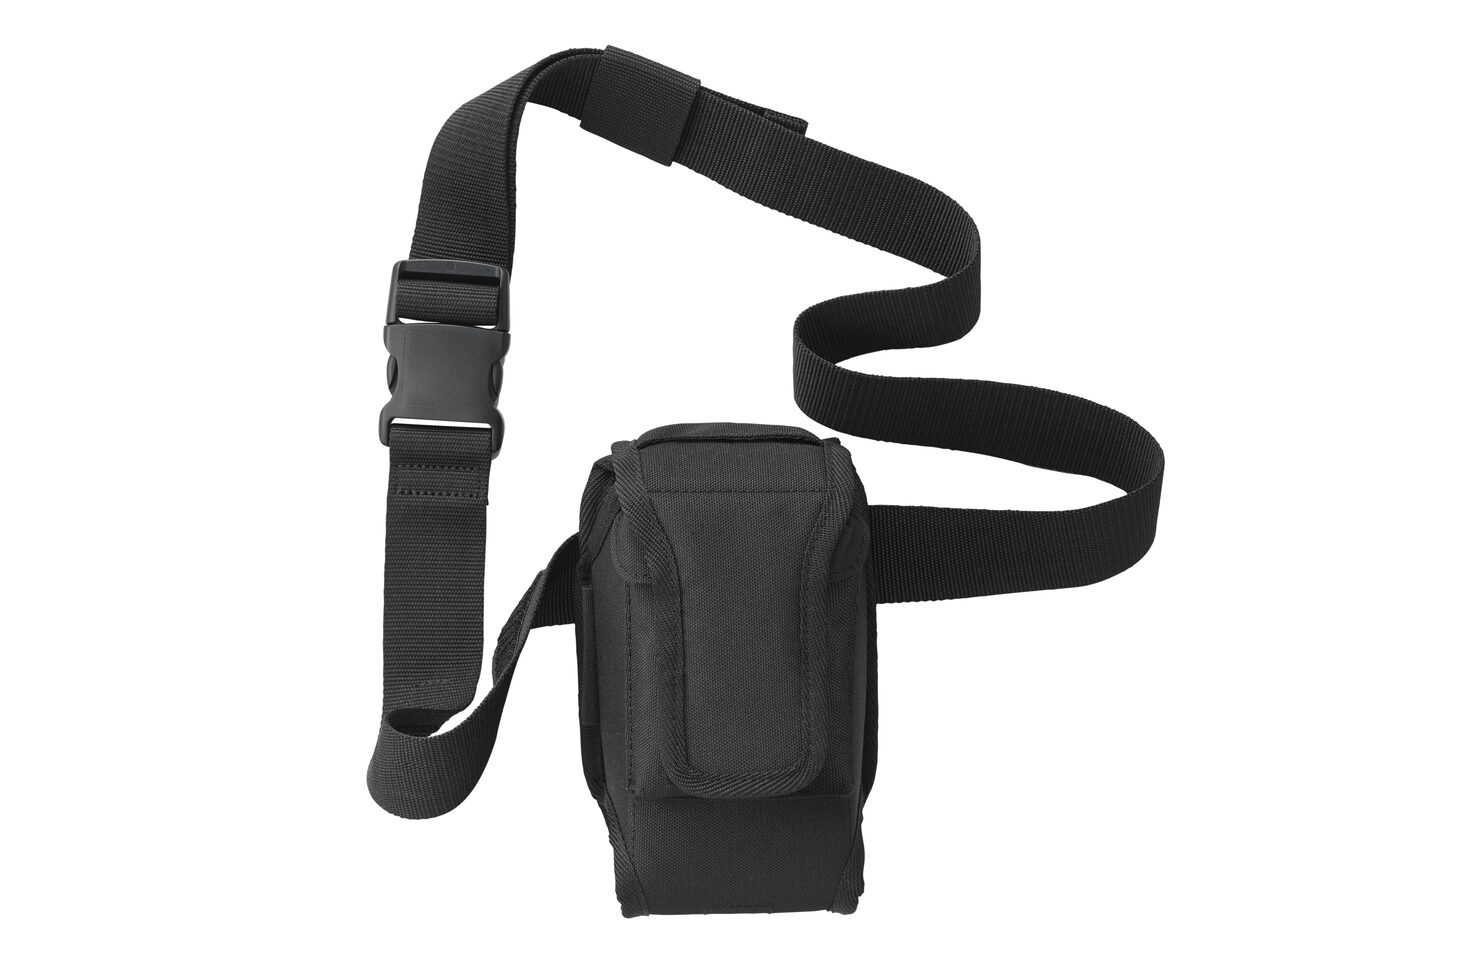 TOUGHBOOK FZ-N1 Holster with Belt